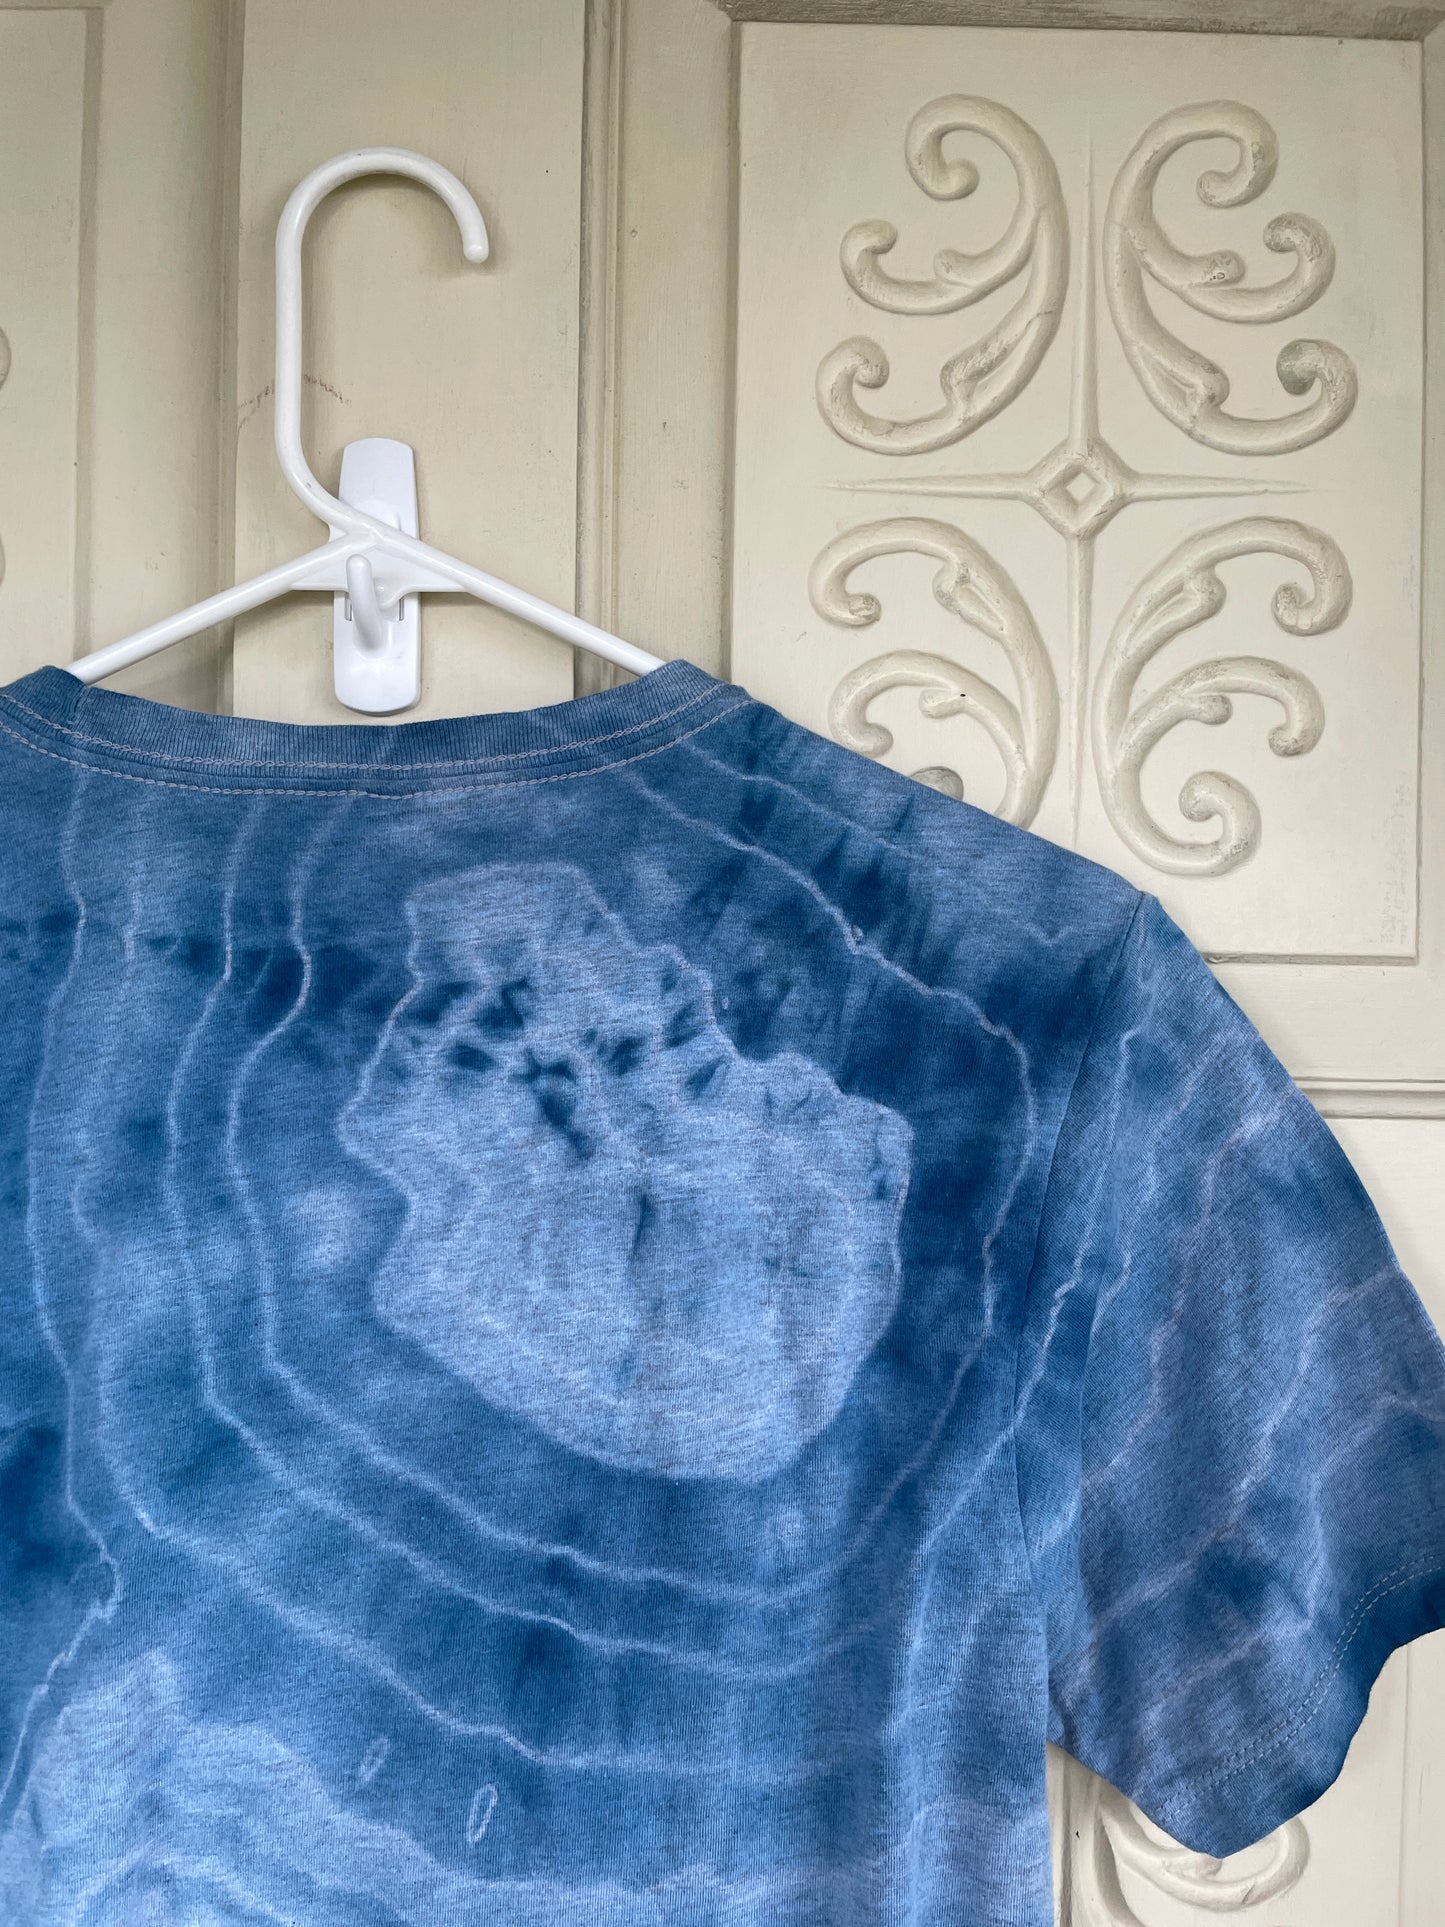 Small Men's Groovy Alien Handmade Galaxy Geode Tie Dye Long-Line T-Shirt | One-Of-a-Kind Upcycled Blue and Gray Short Sleeve Shirt